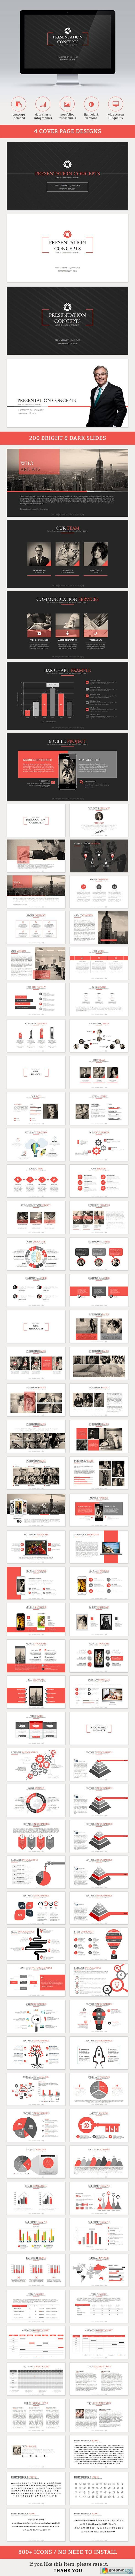 Axis Powerpoint Template